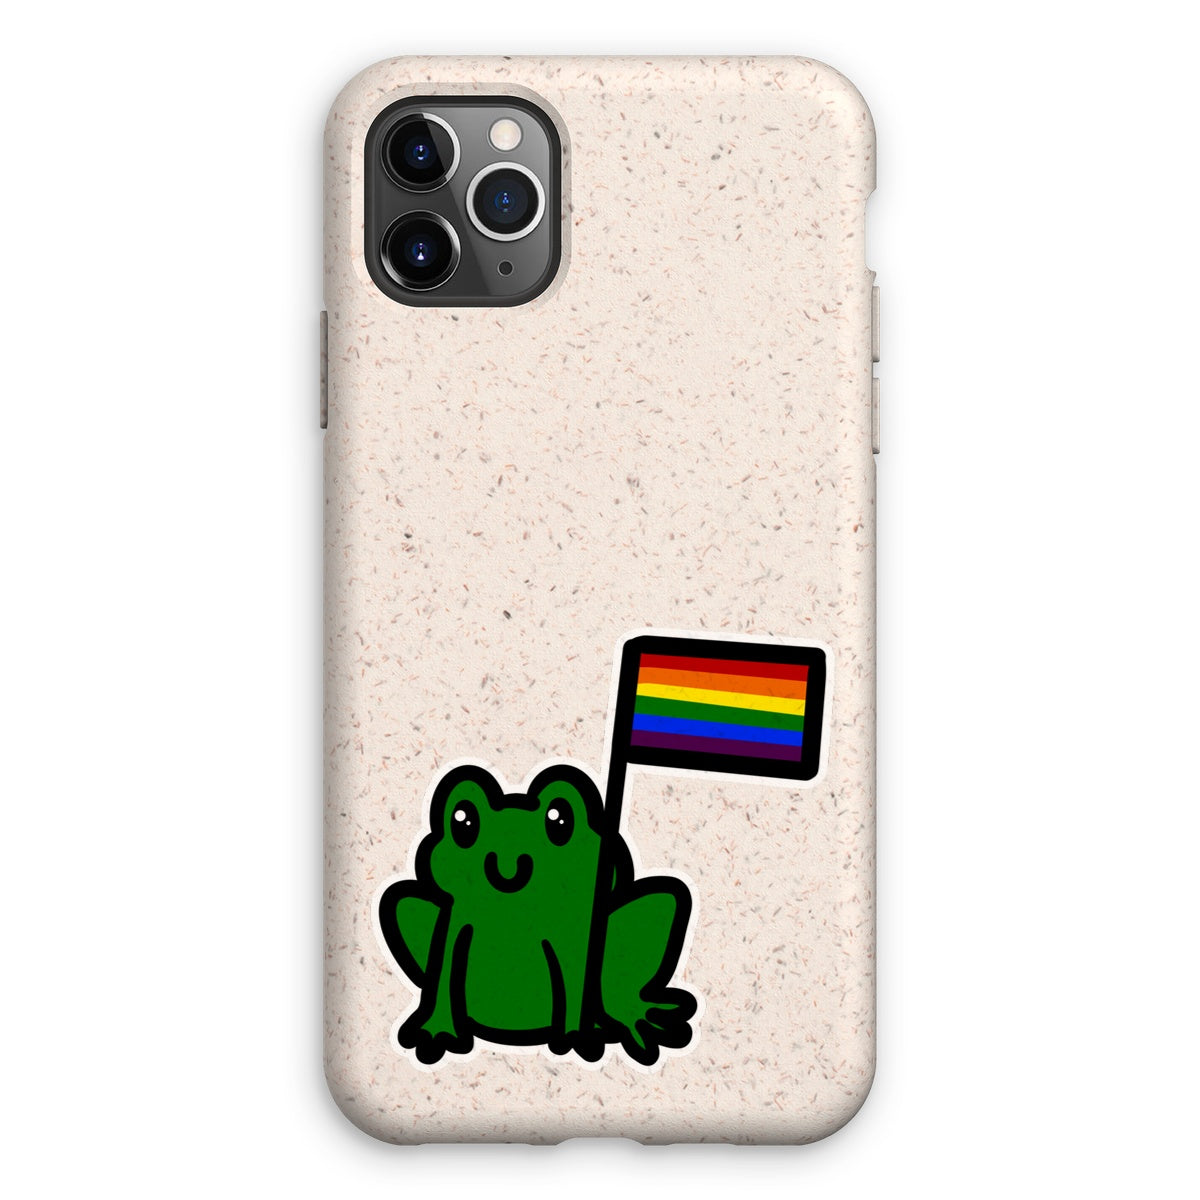 Turn the Frogs Gay Sticker Eco Phone Case